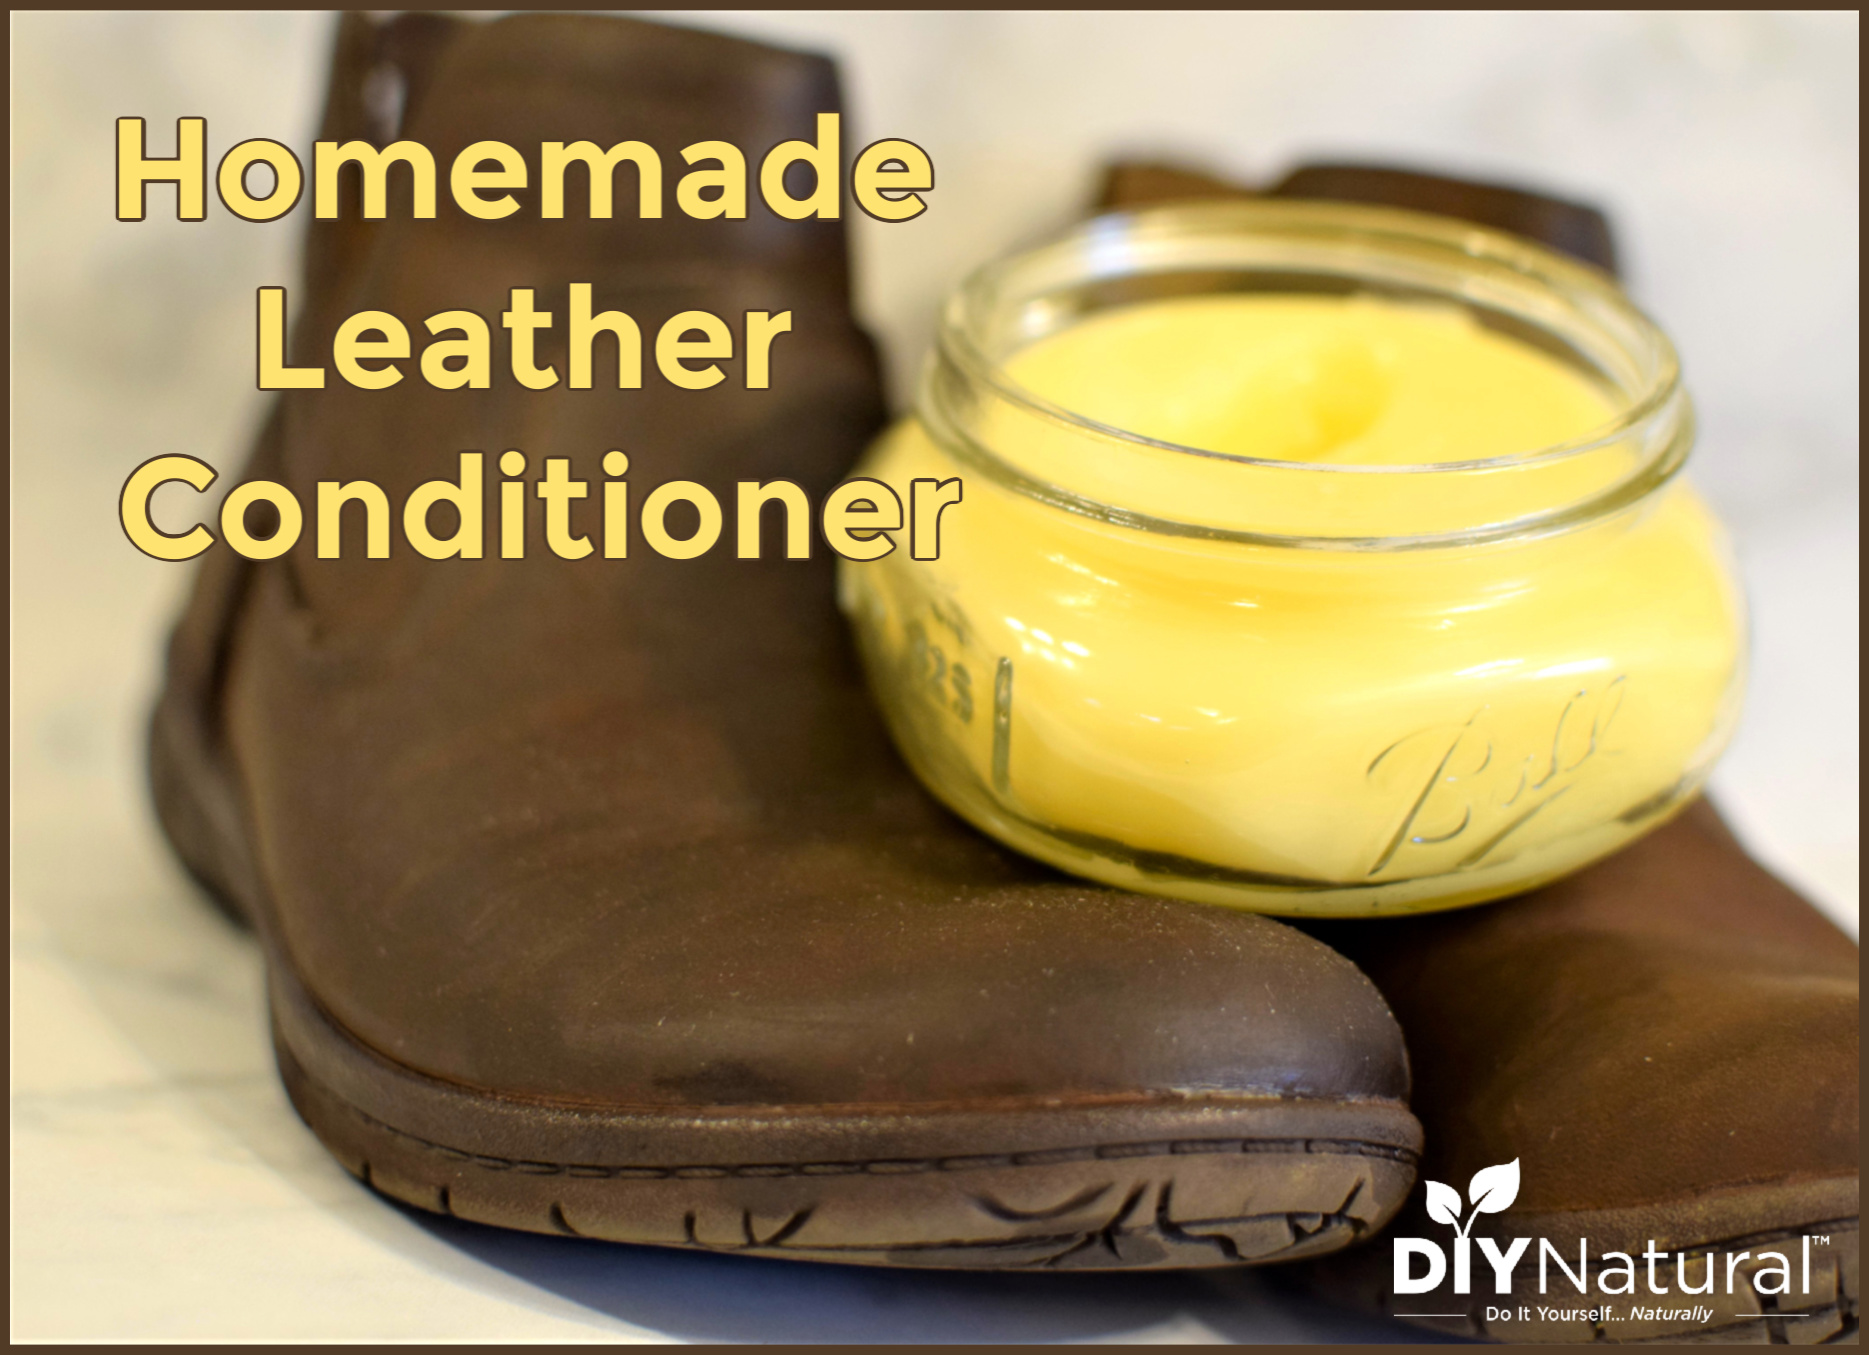 Homemade Leather Conditioner: Clean, Soften, & Protect Leather